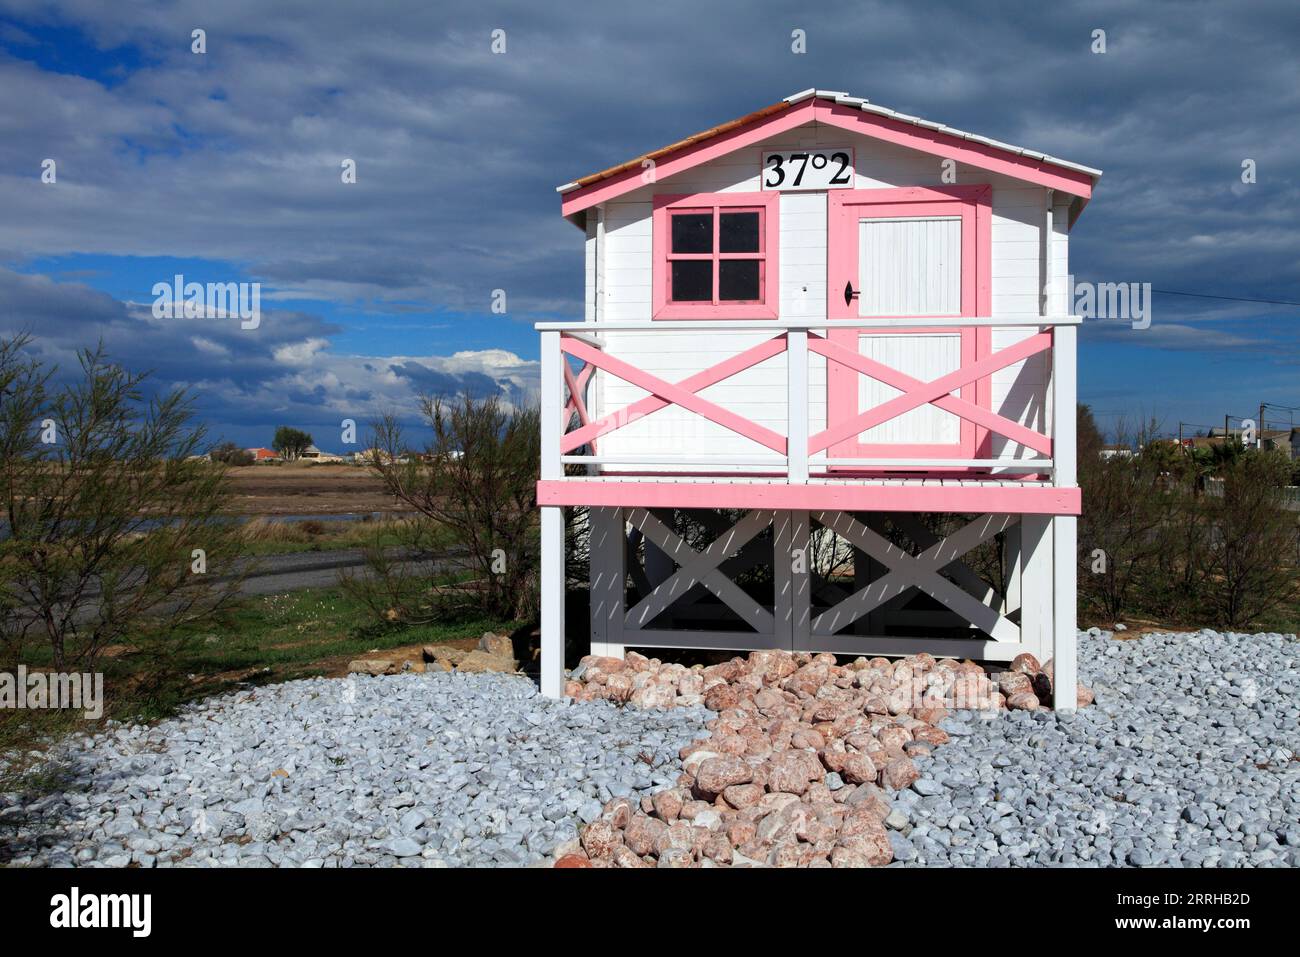 Replica of a roadside chalet near Chalets beach. Homage to Luc Besson's film: 37°2. Gruissan, Occitanie, France Stock Photo